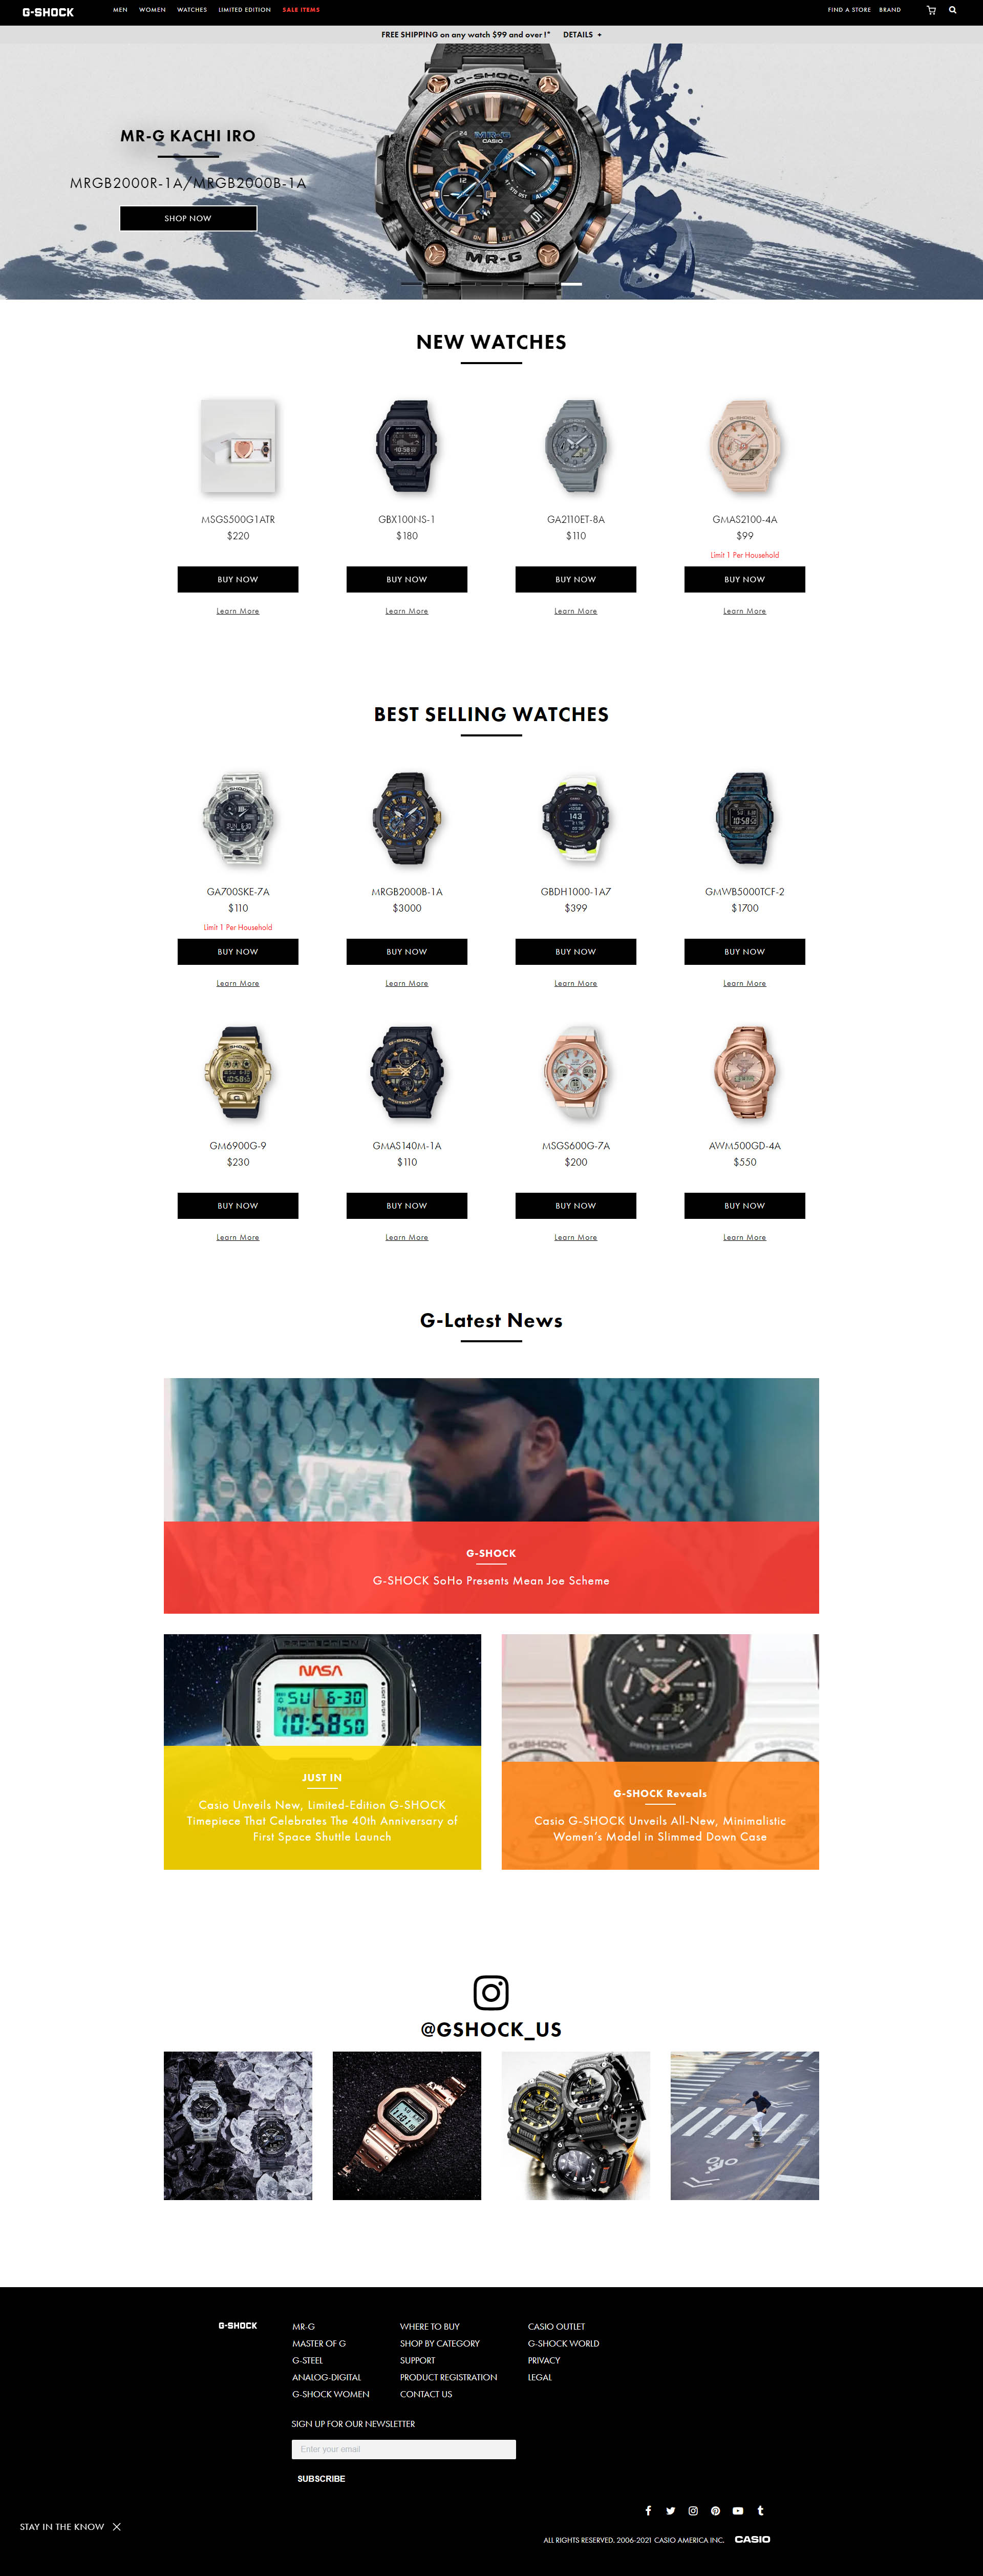 gshock home page